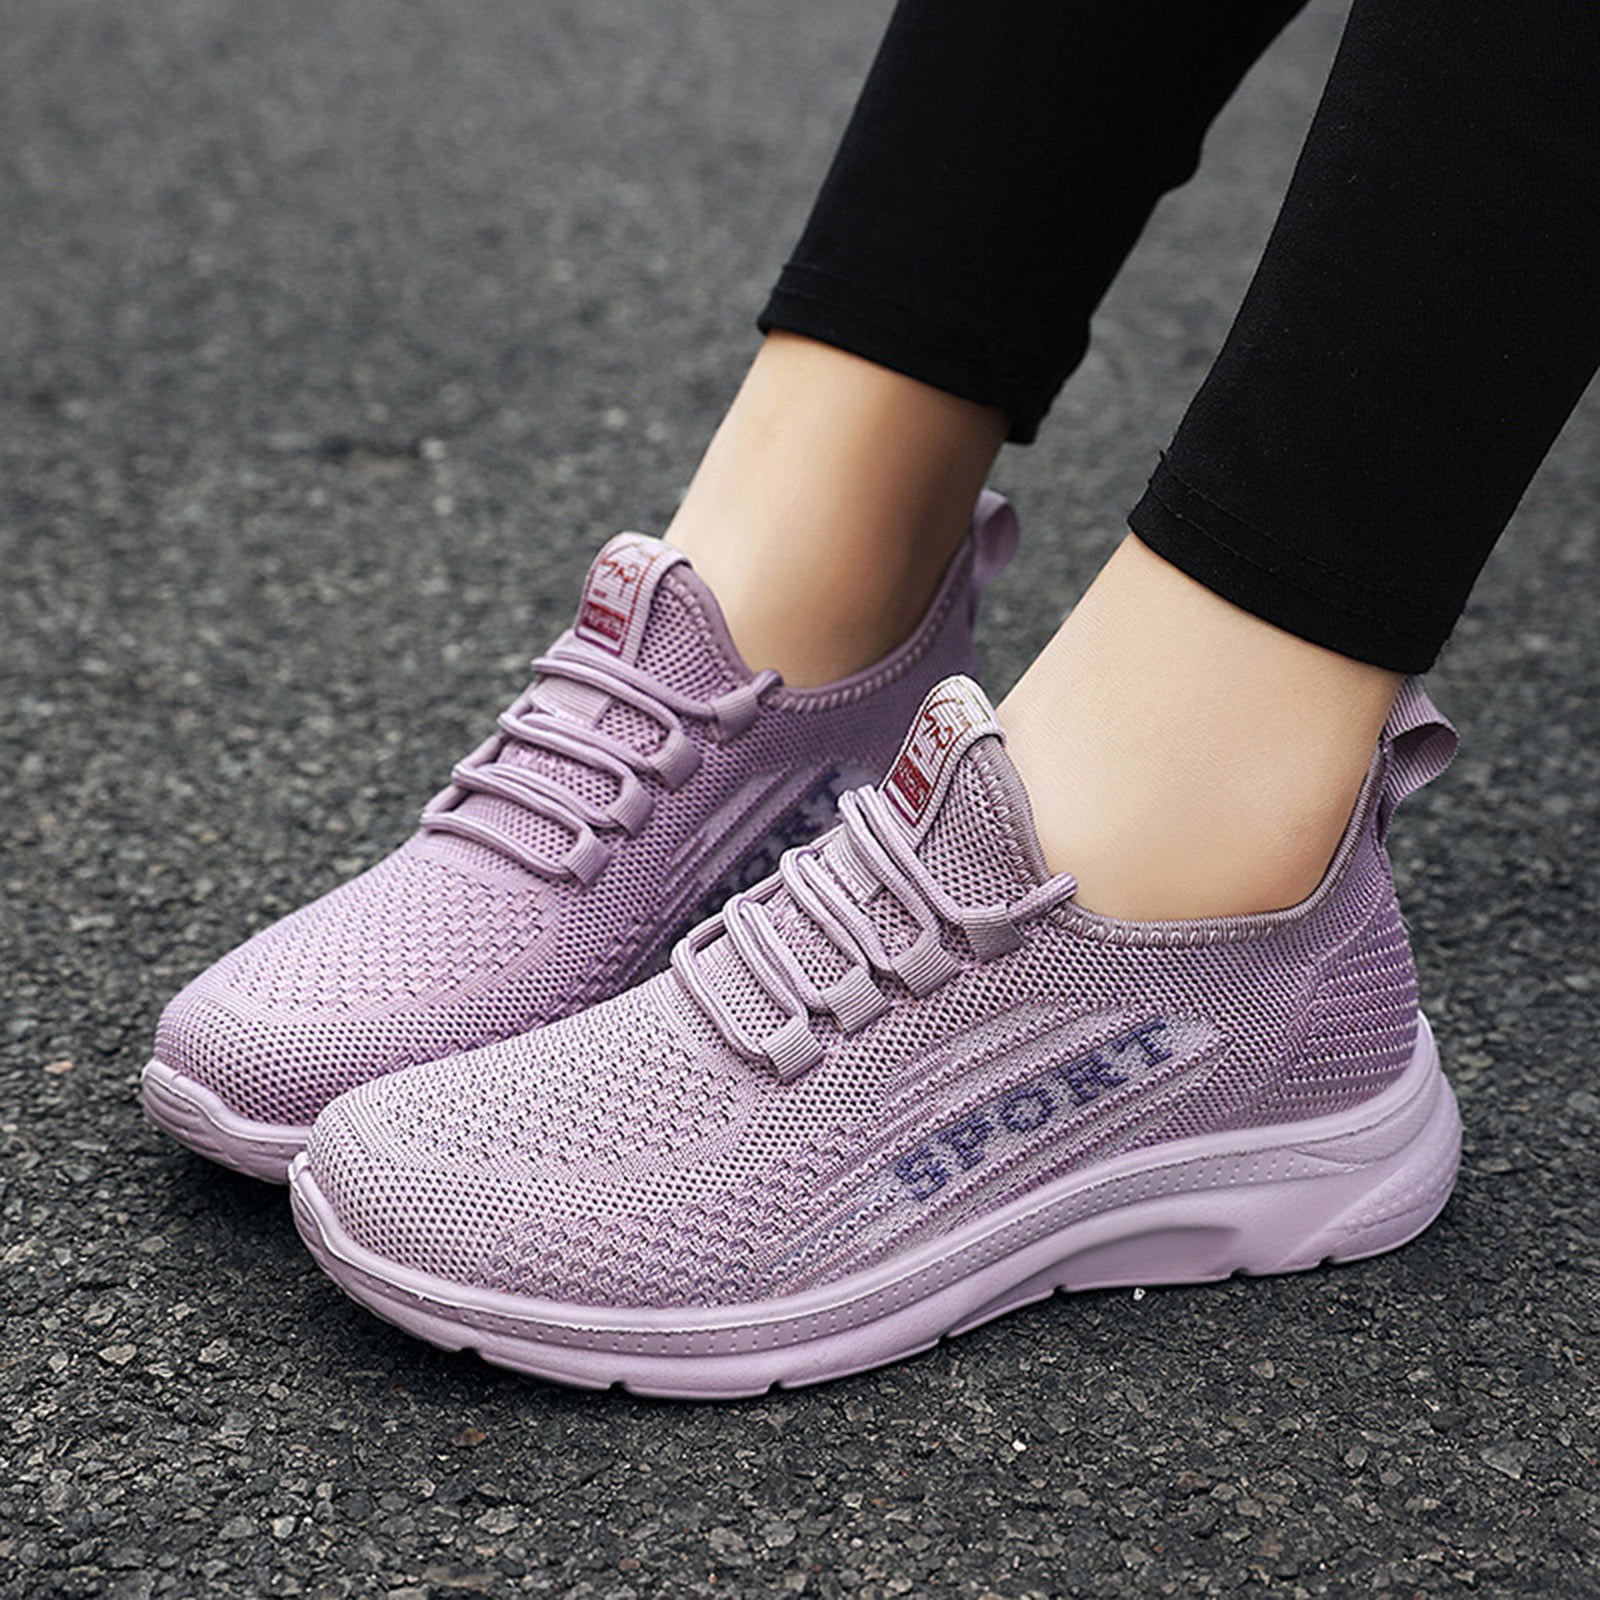 Breathable Glitter Vulcanized Dressy Tennis Shoes Womens For Women Perfect  For Casual Outdoor Sports And Bling Style 230321 From Jiao004, $18.17